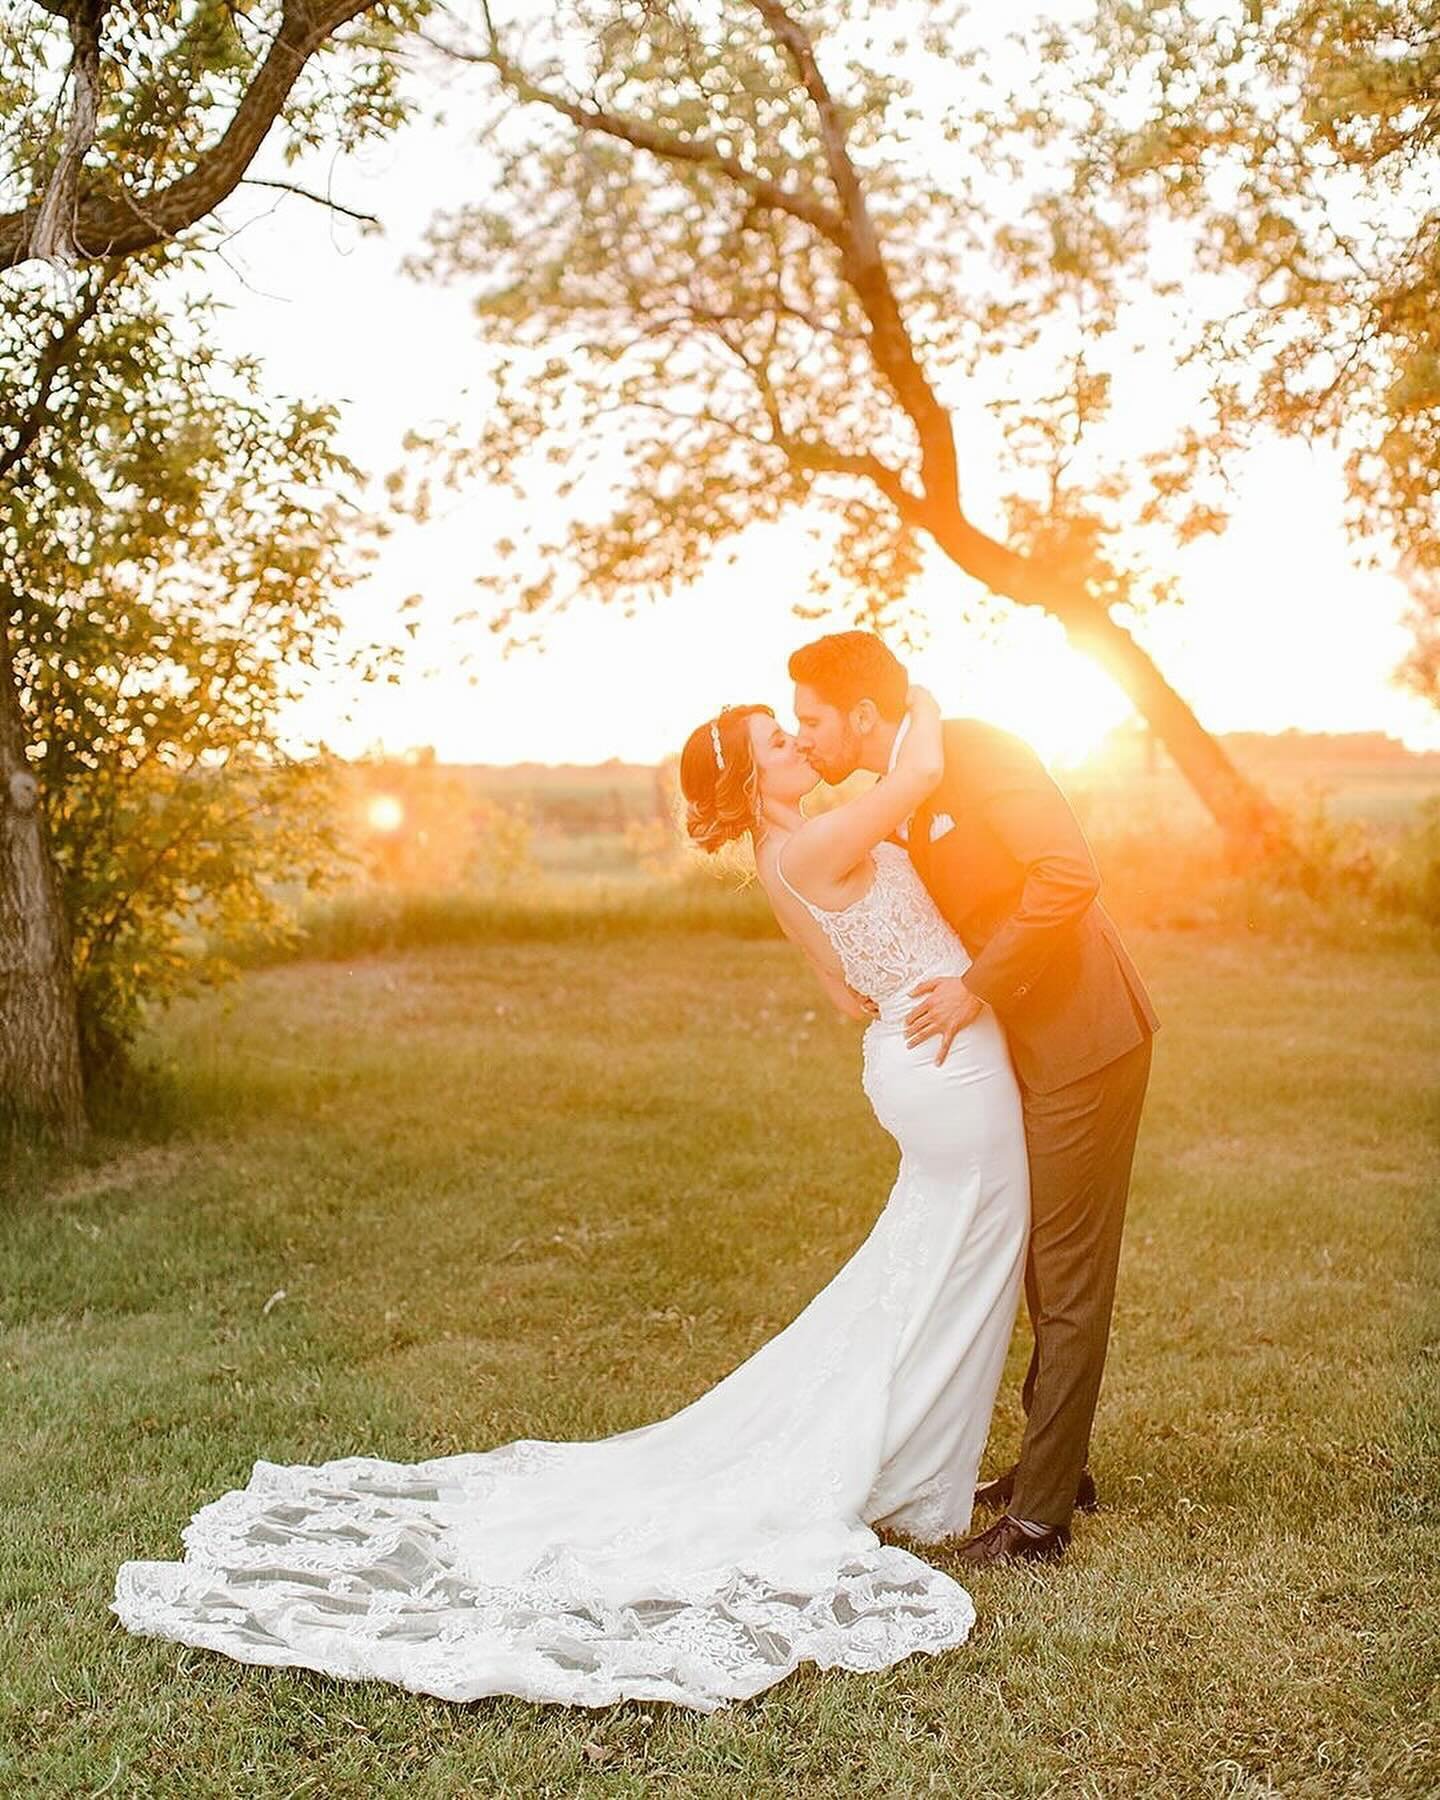 Golden hour!!✨ at its finest 
we just love seeing the magic that this time of evening brings for the most dreamy photos and memorable wedding moments 

Captured by: @caseynolinphotography
&bull;
&bull;
&bull;

#winnipegweddingvenue #ruralweddings #ma